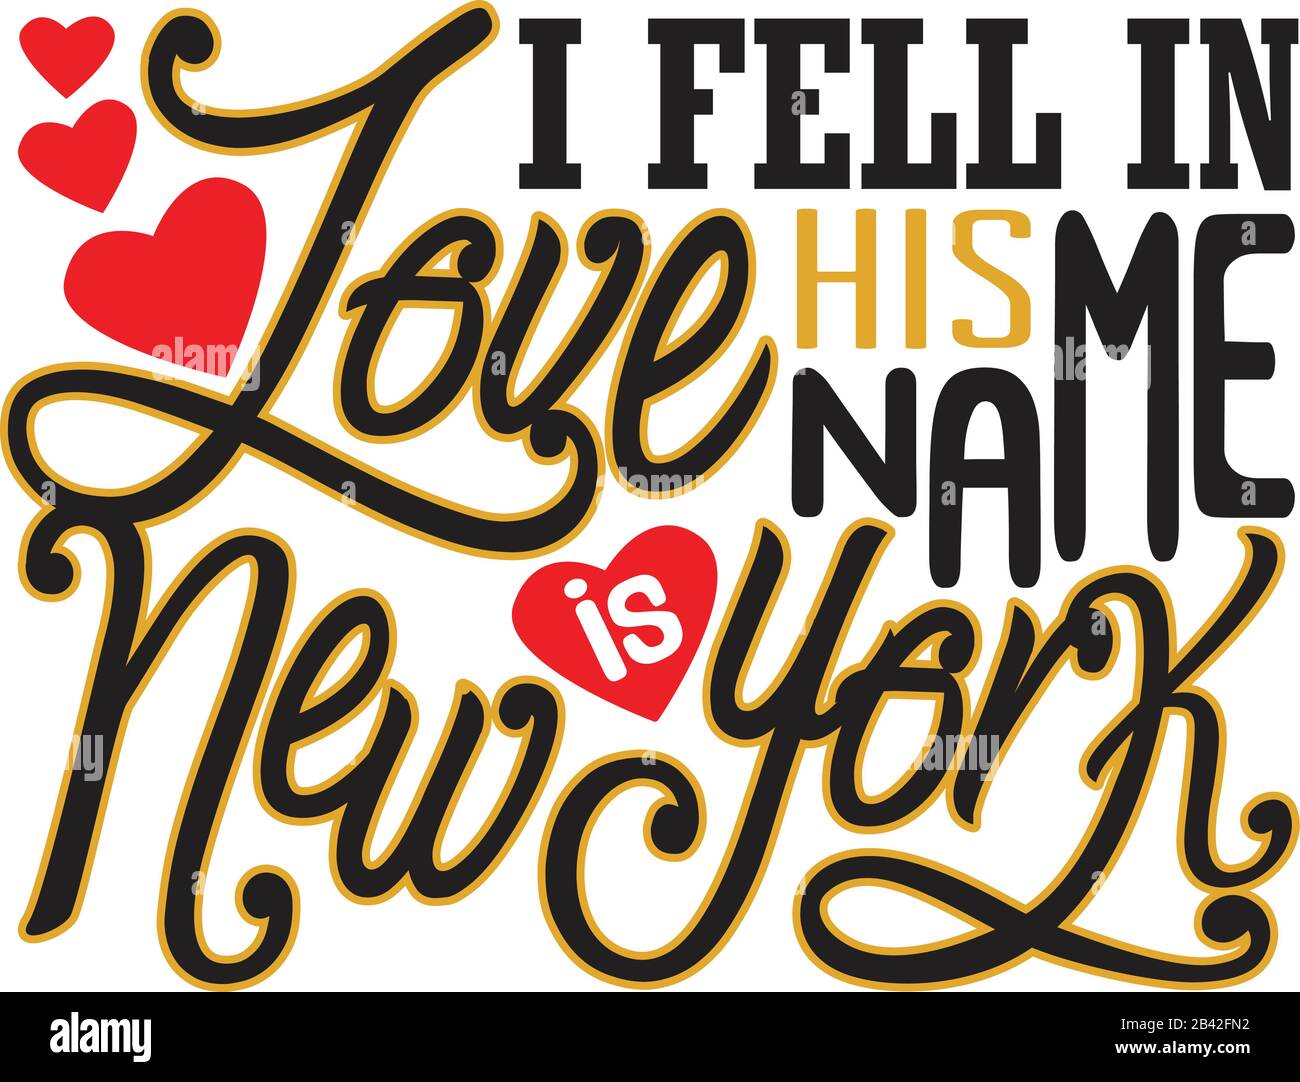 New York Quotes and Slogan good for Tee. I Fell In Love His Name Is New York. Stock Vector